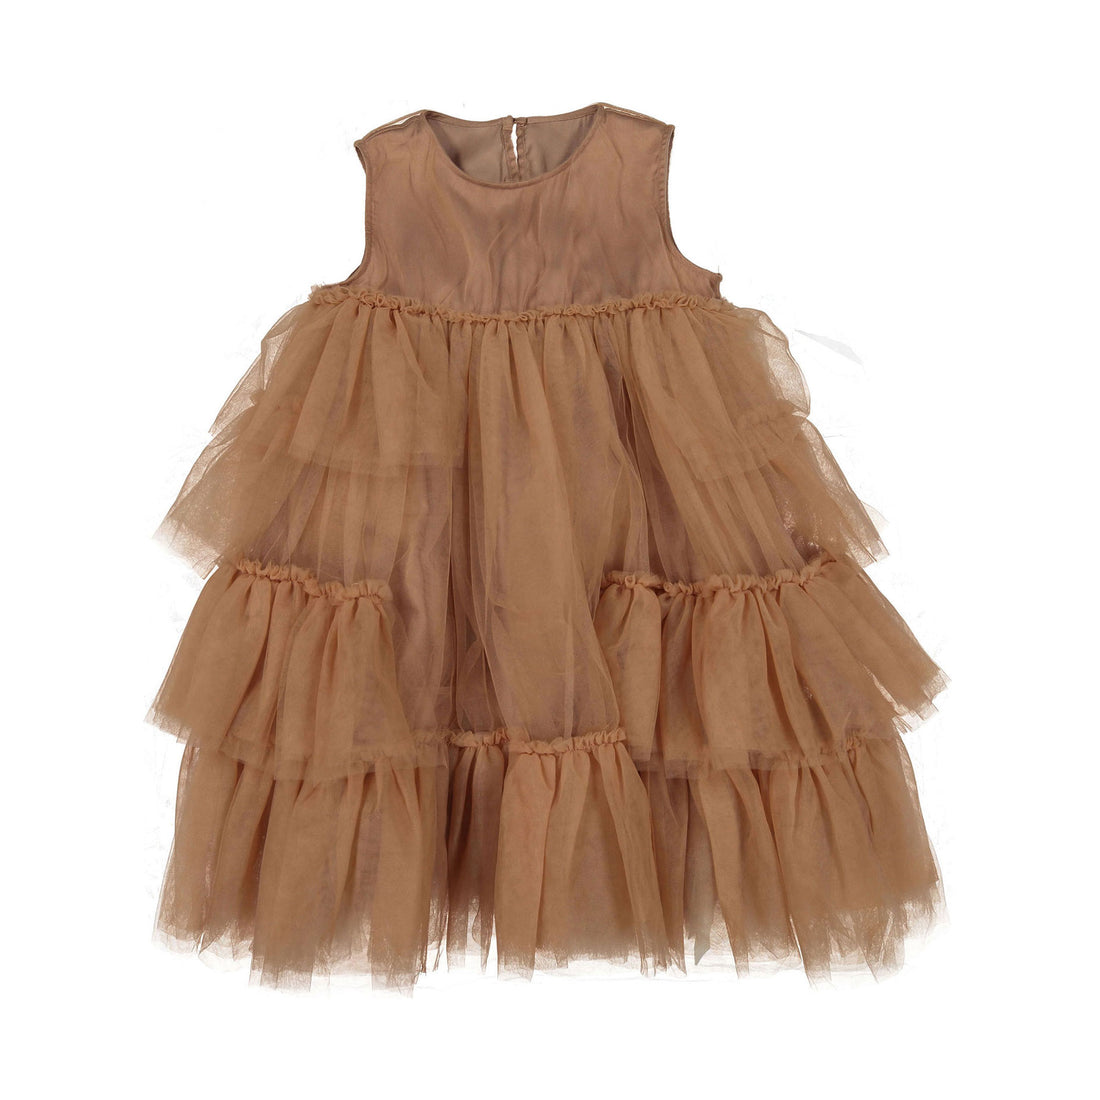 JNBY Pink Layered Tulle Dress